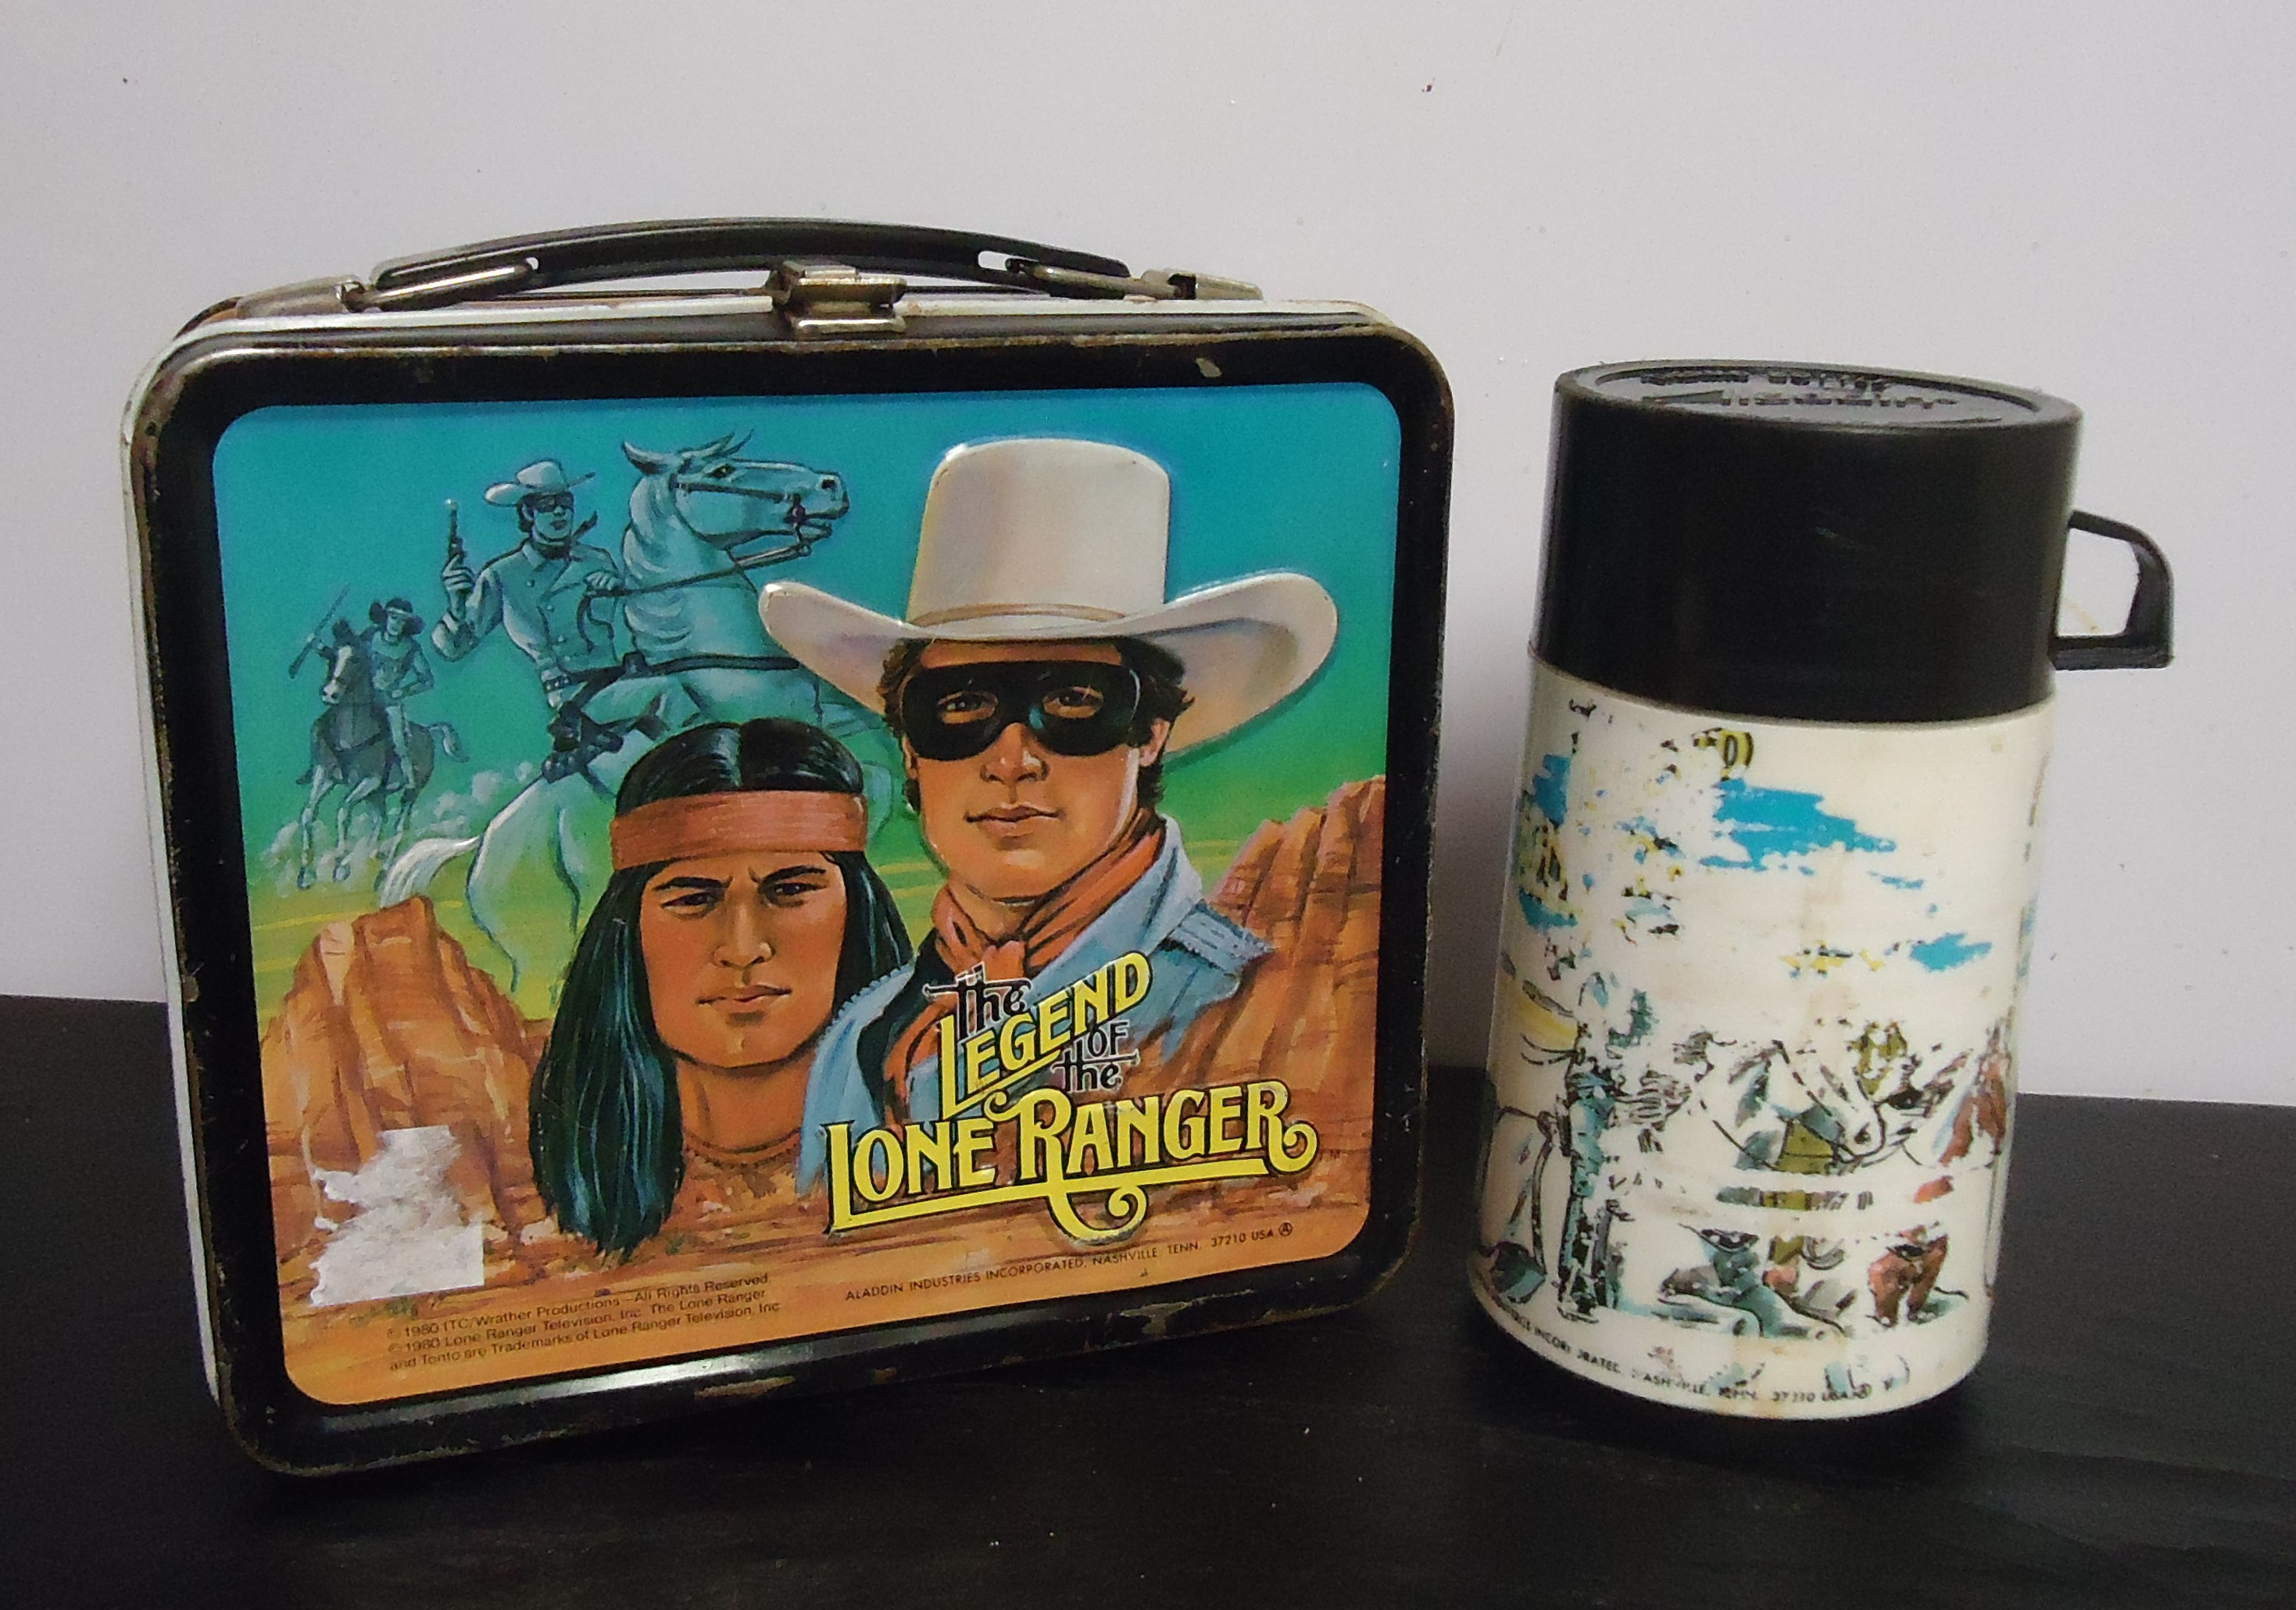 (8) "The Lone Ranger" Metal Lunch Box
W/ Thermos
$50.00